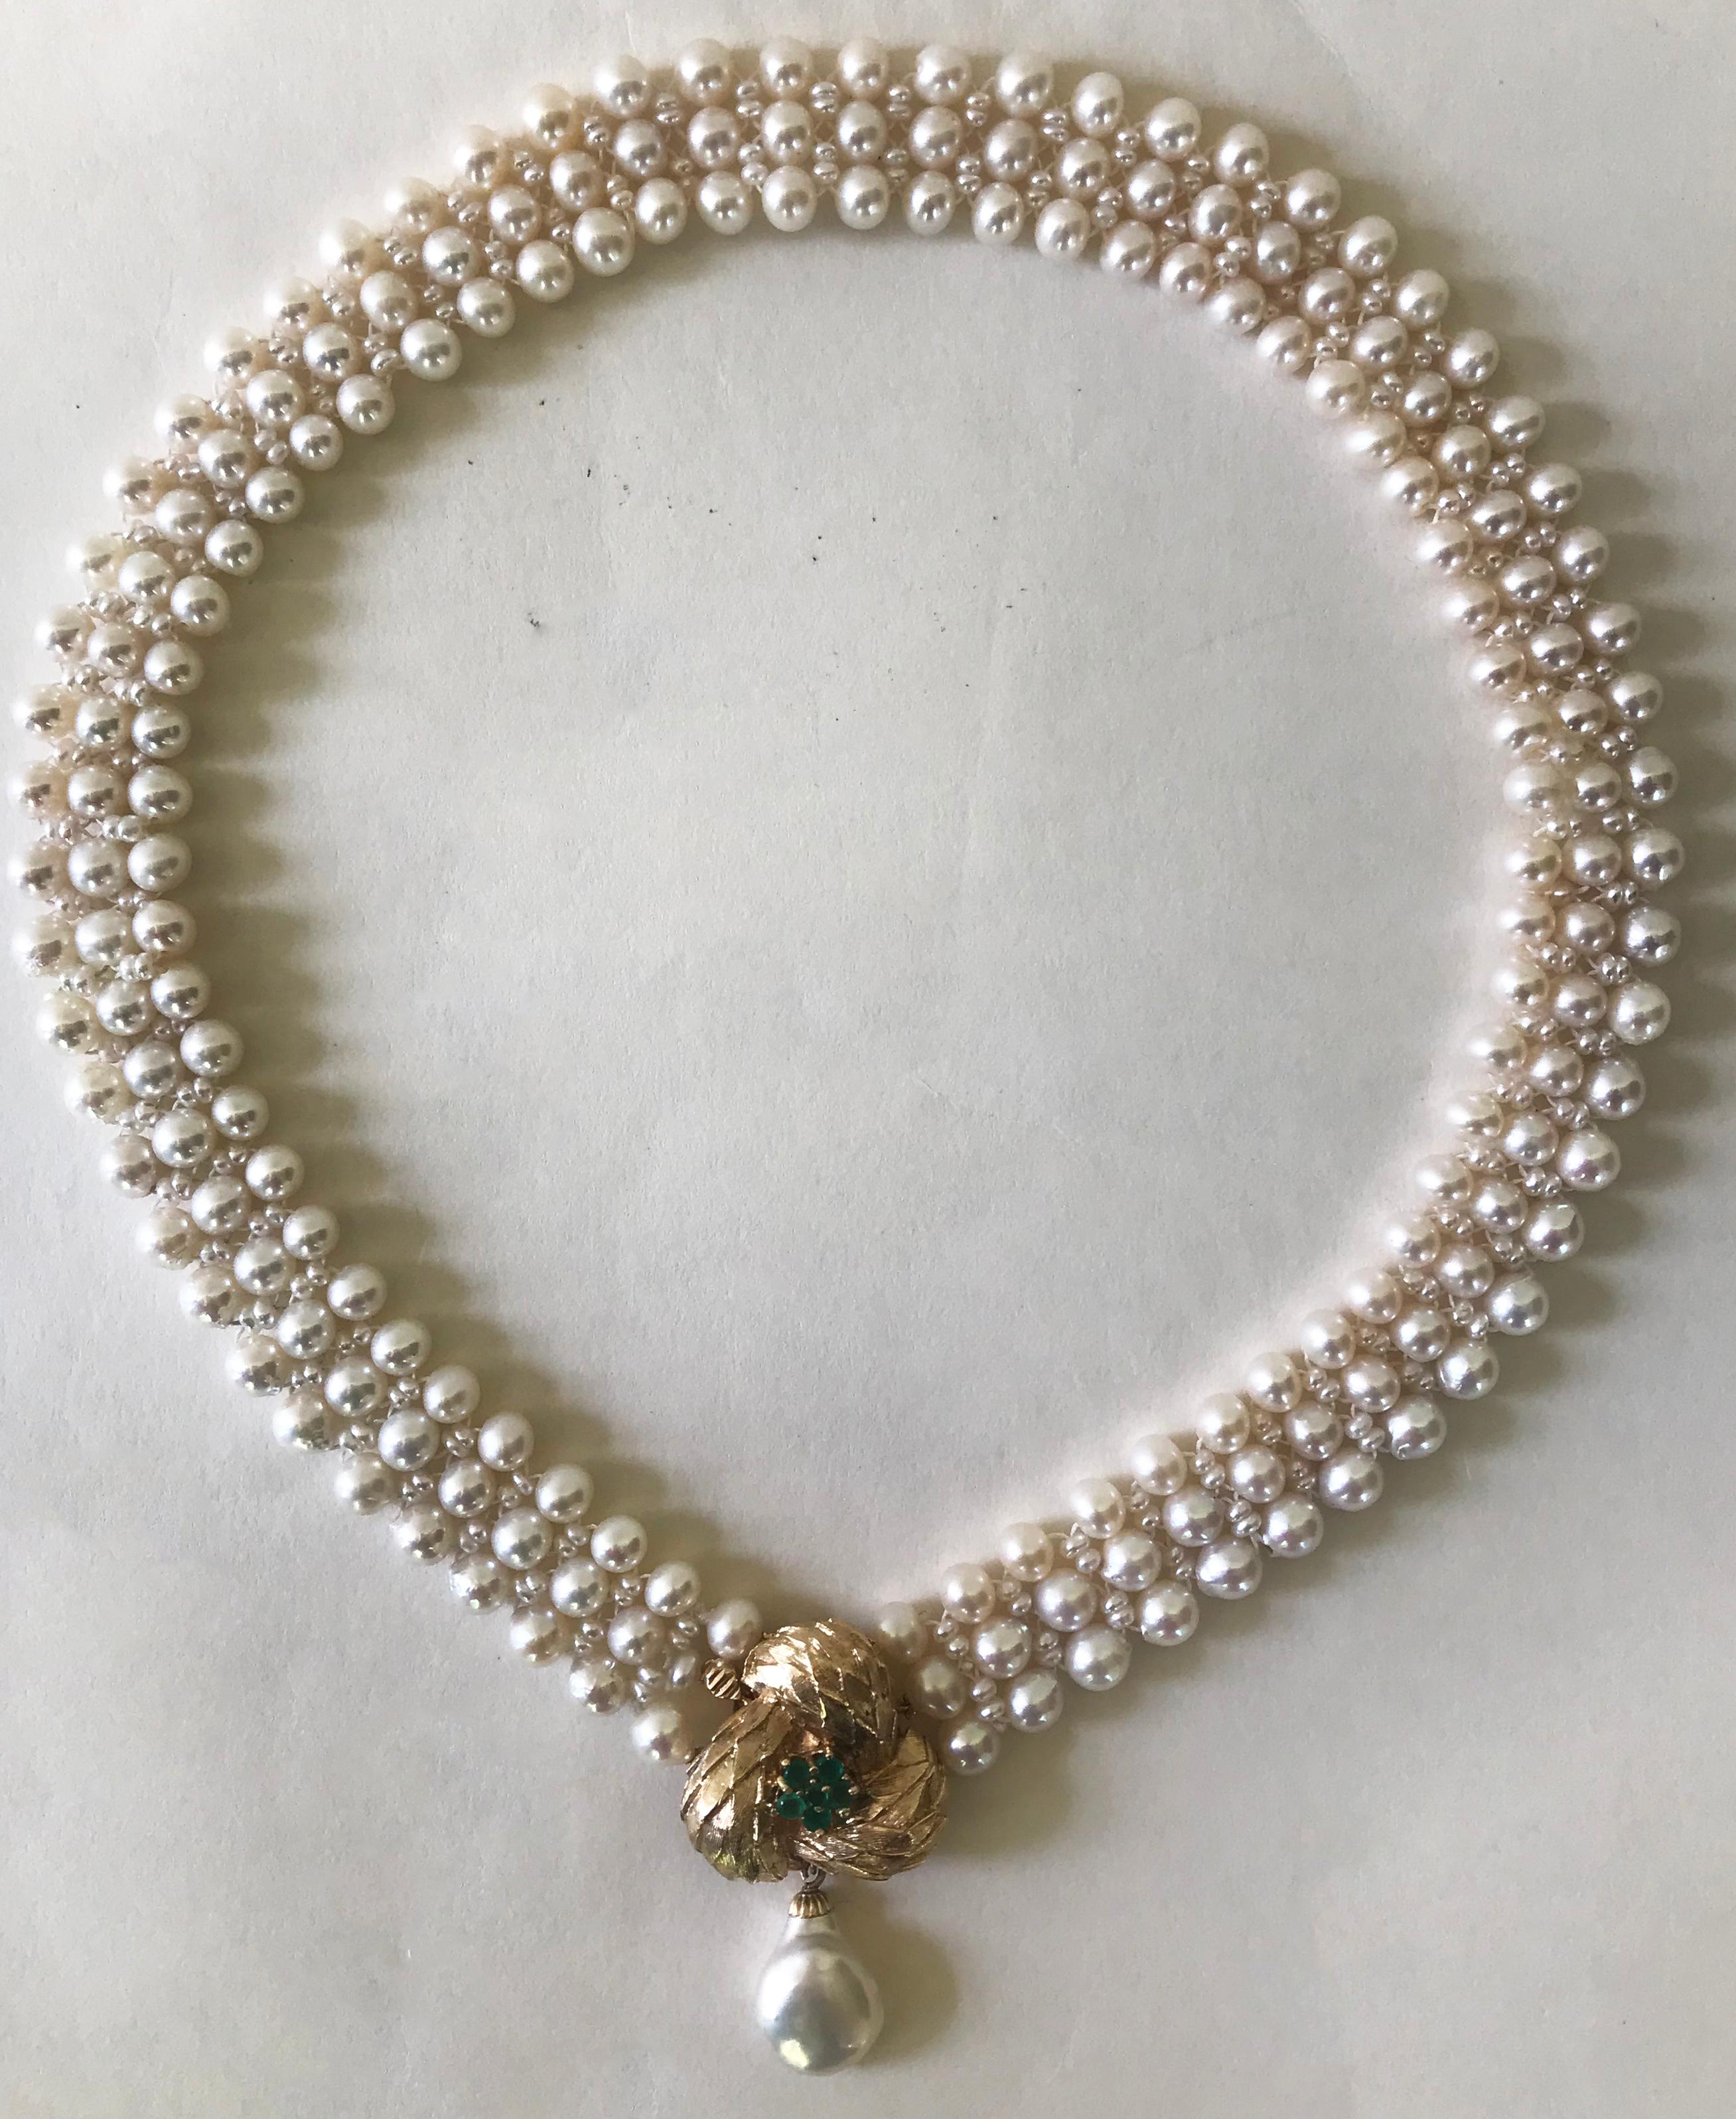 Marina J. Pearl Necklace with Vintage 14k Yellow Gold and Emerald Center-Clasp For Sale 5